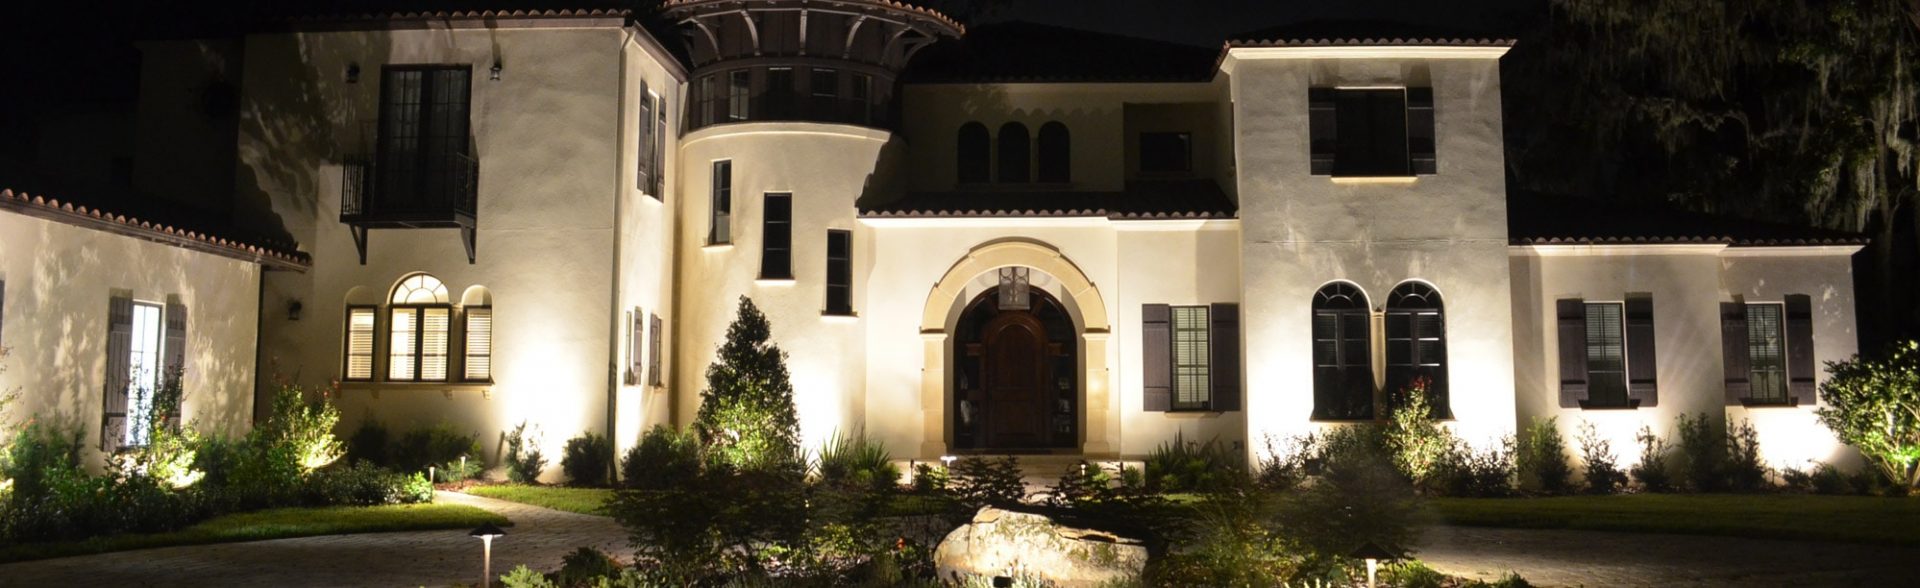 Large home with exterior lighting